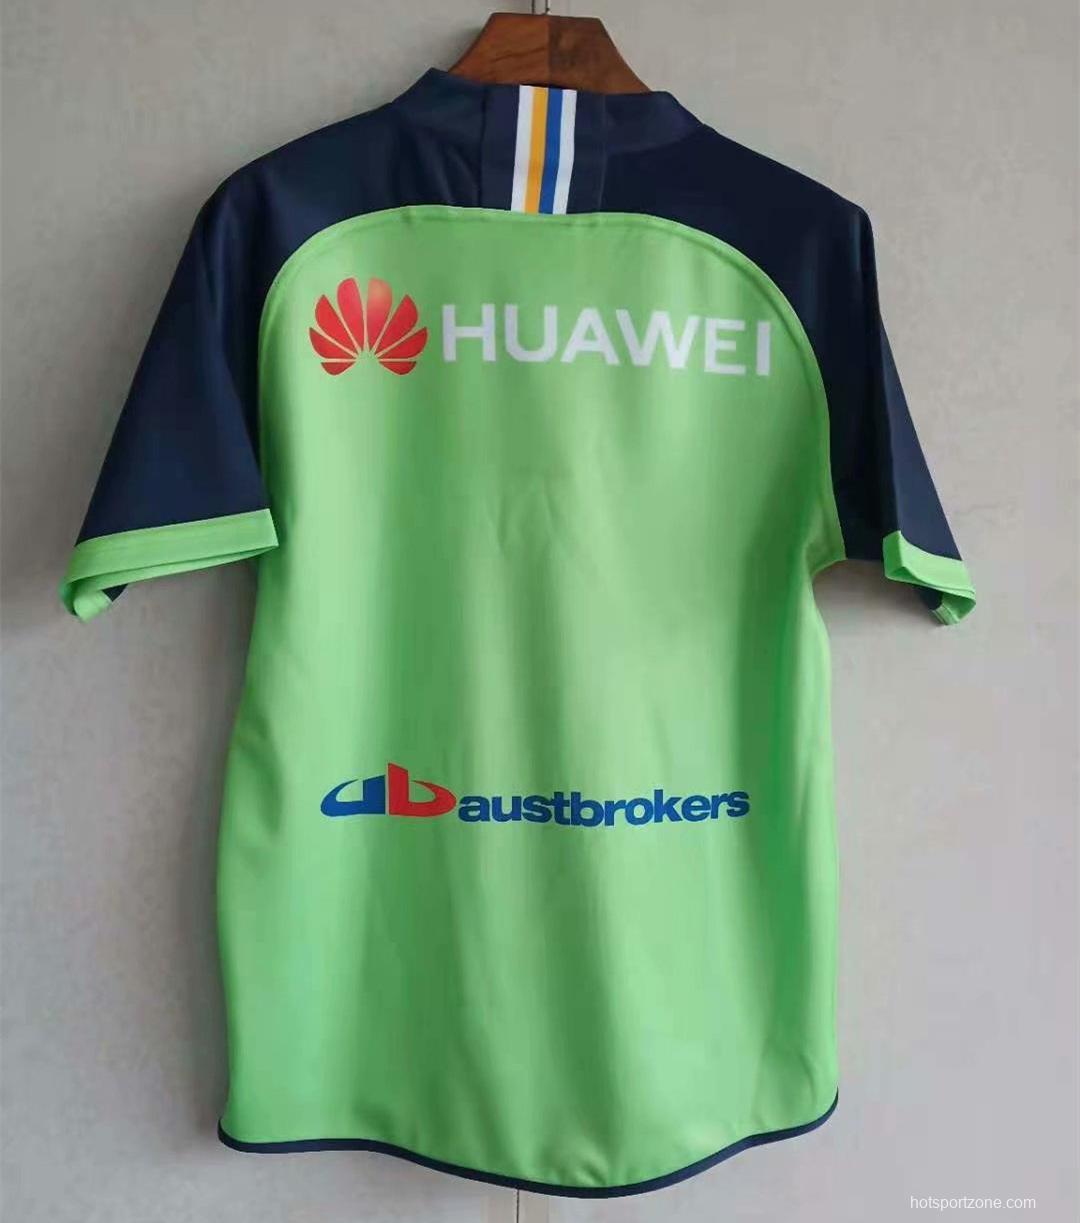 Canberra Raiders 2021 Men's Home Rugby Jersey